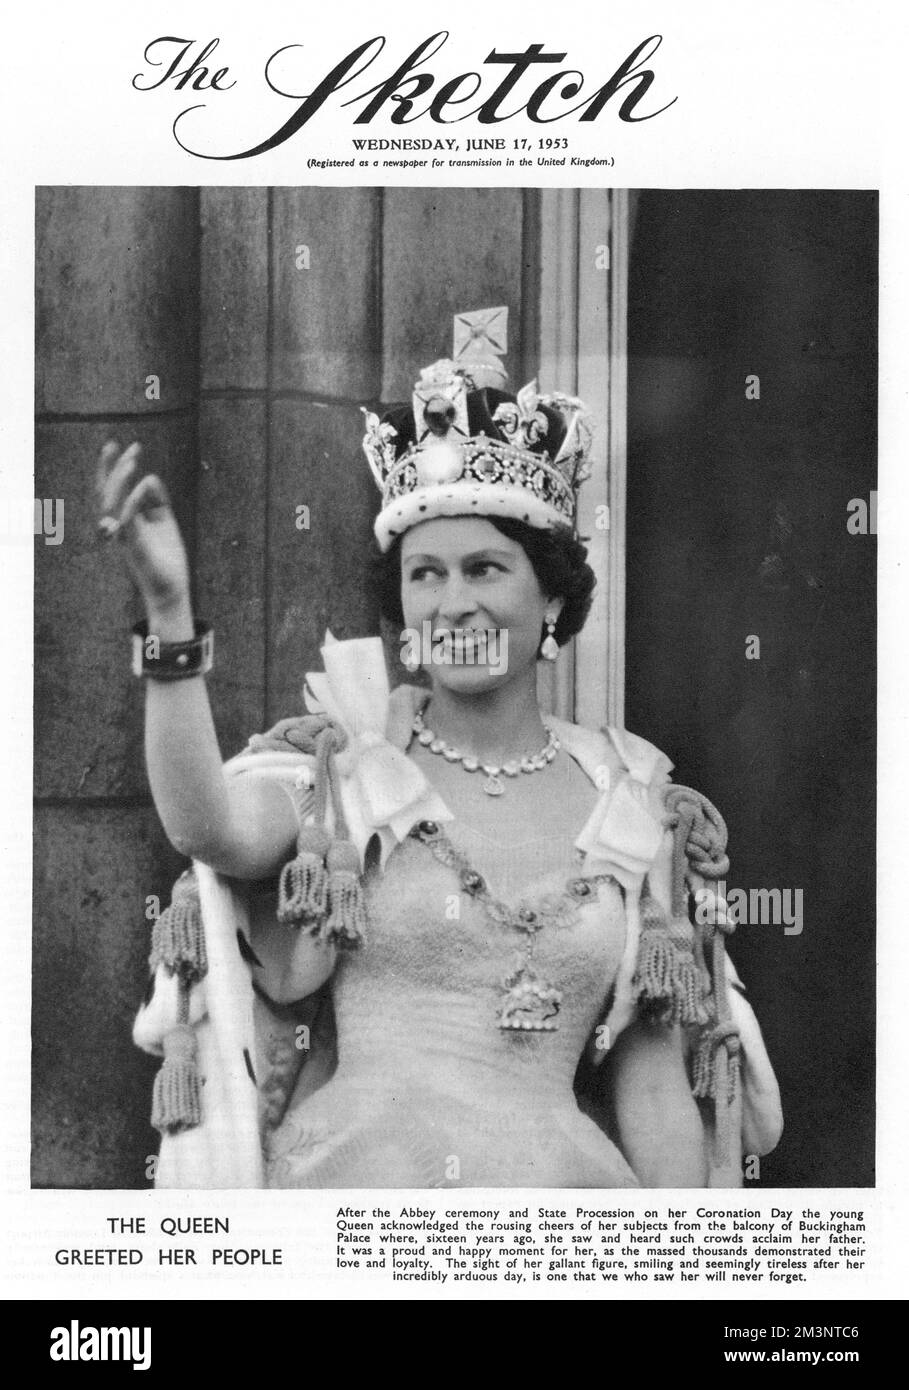 Queen Elizabeth II wearing the Imperial State Crown, waves to crowds from the balcony of the Buckingham Palace following her Coronation at Westminster Abbey on 2nd June 1953.     Date: 1953 Stock Photo